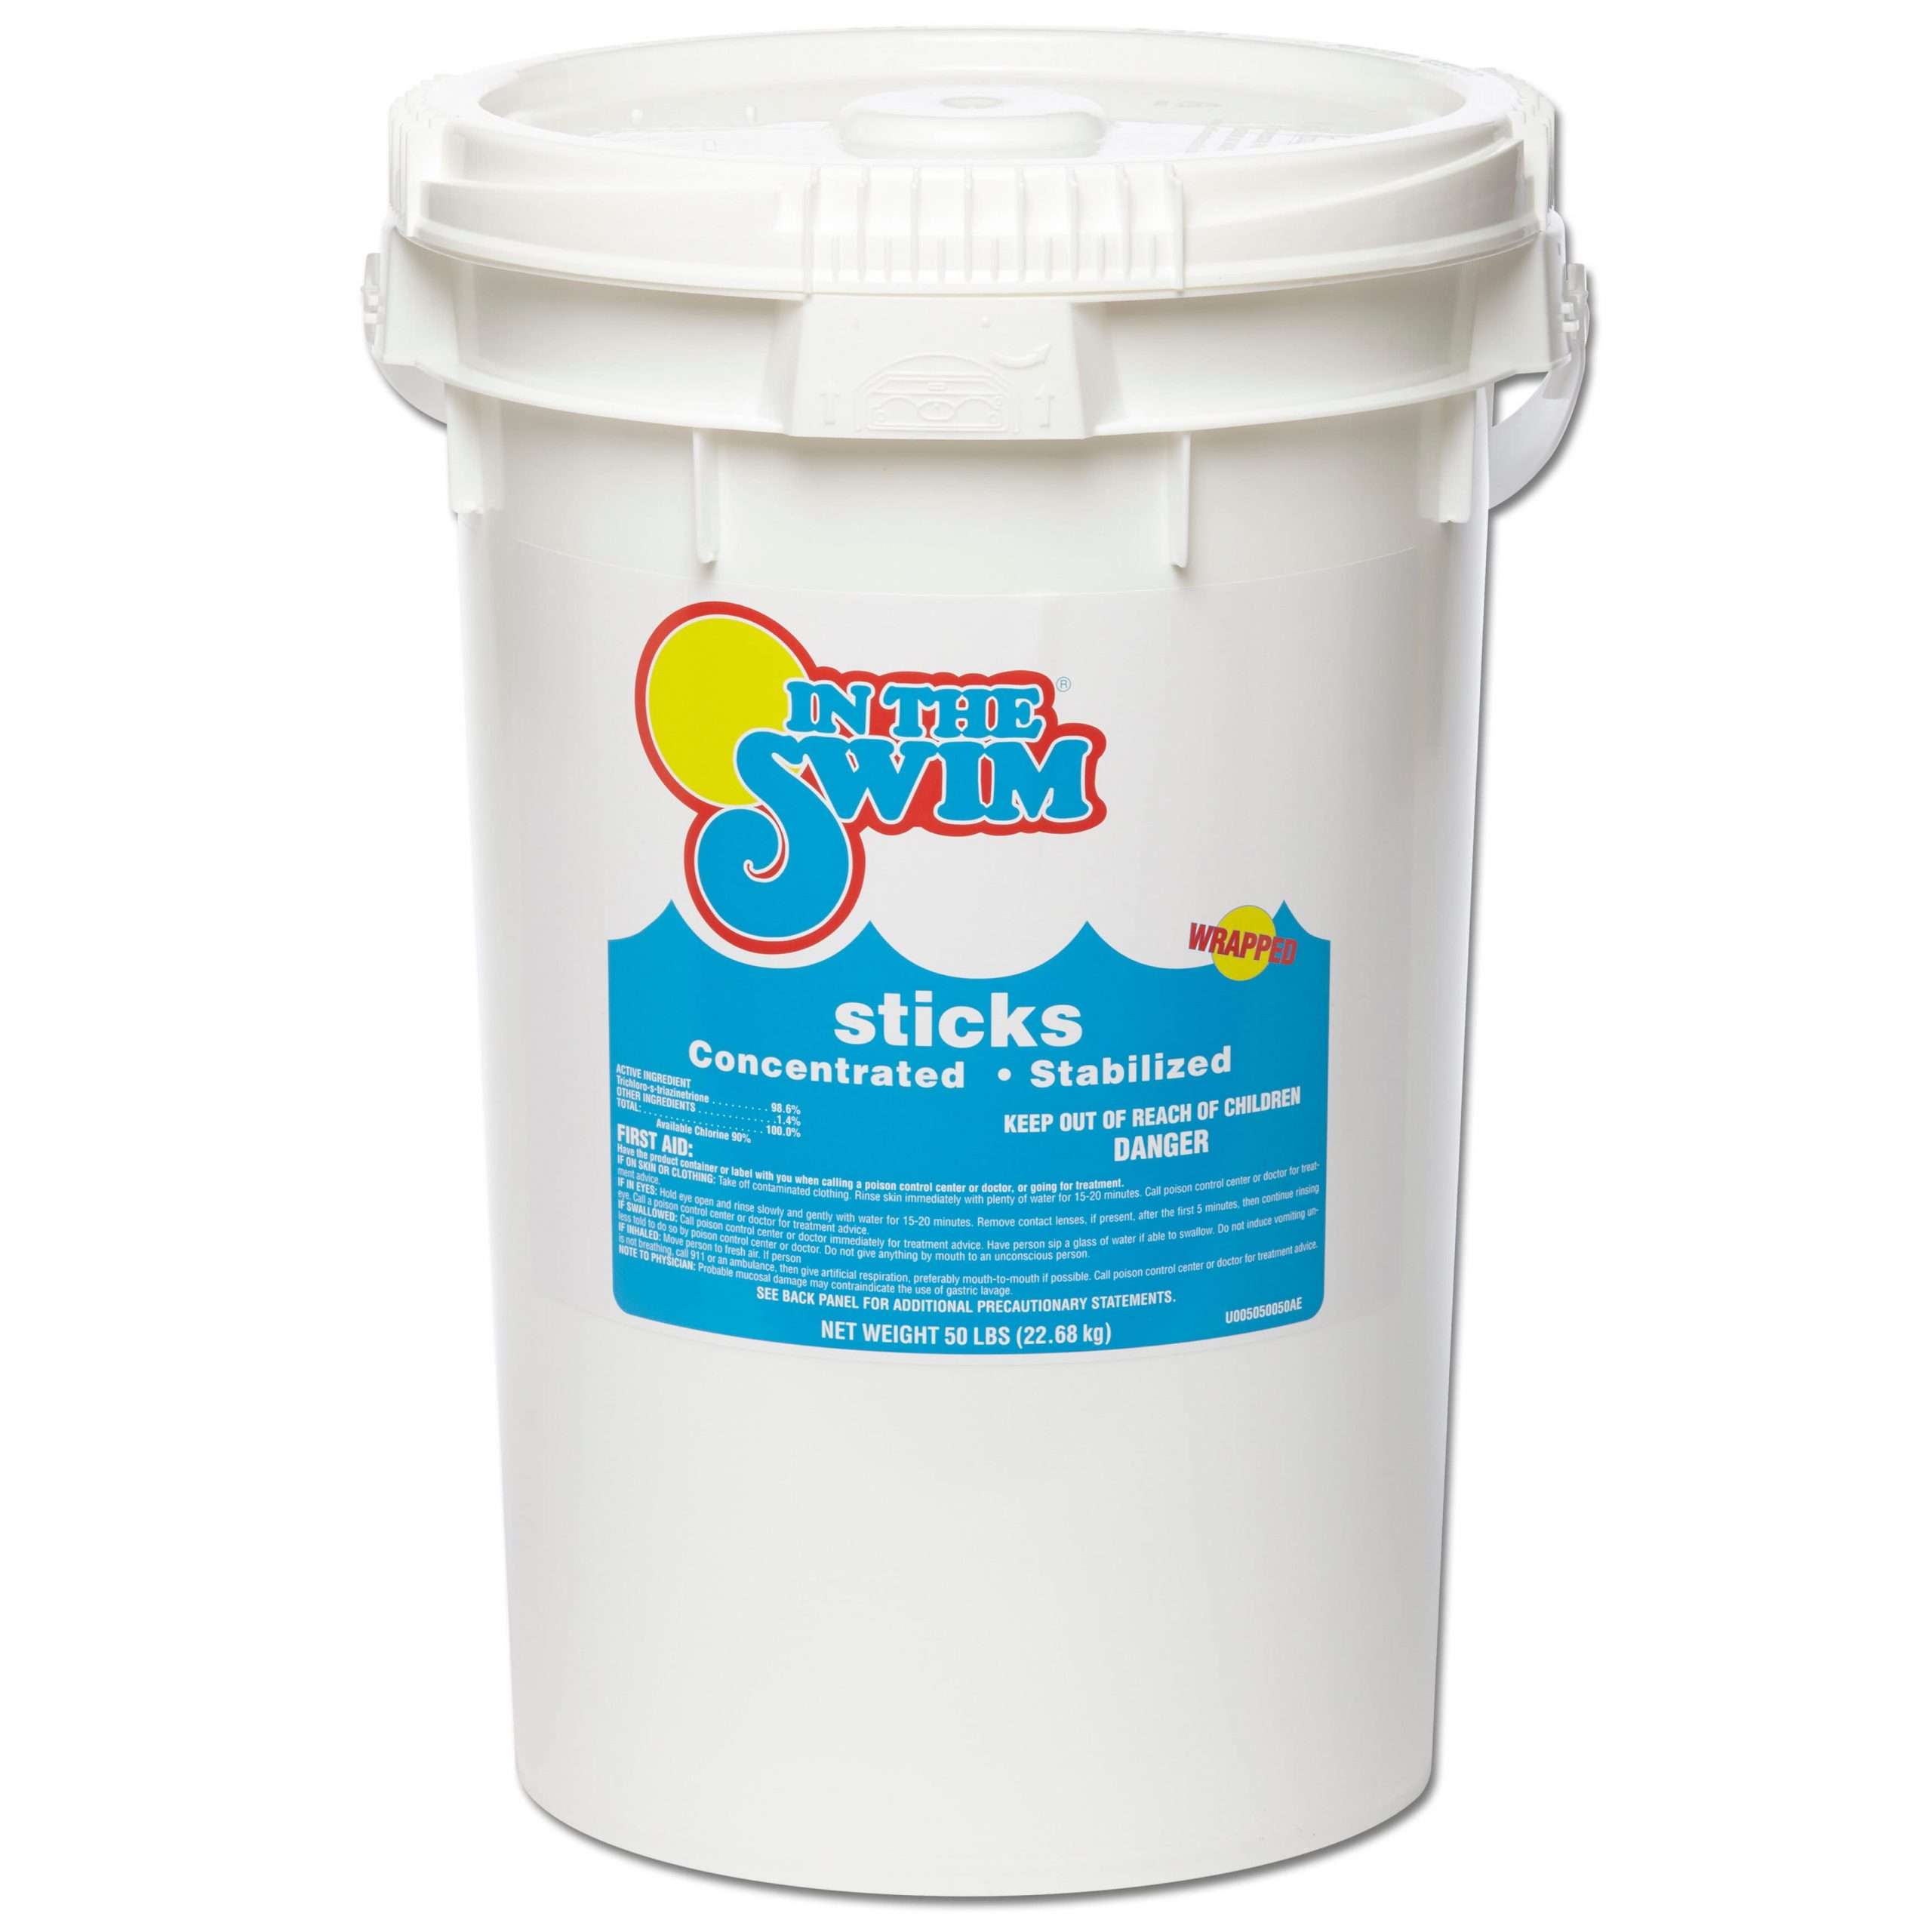 Pool Chemicals For Less